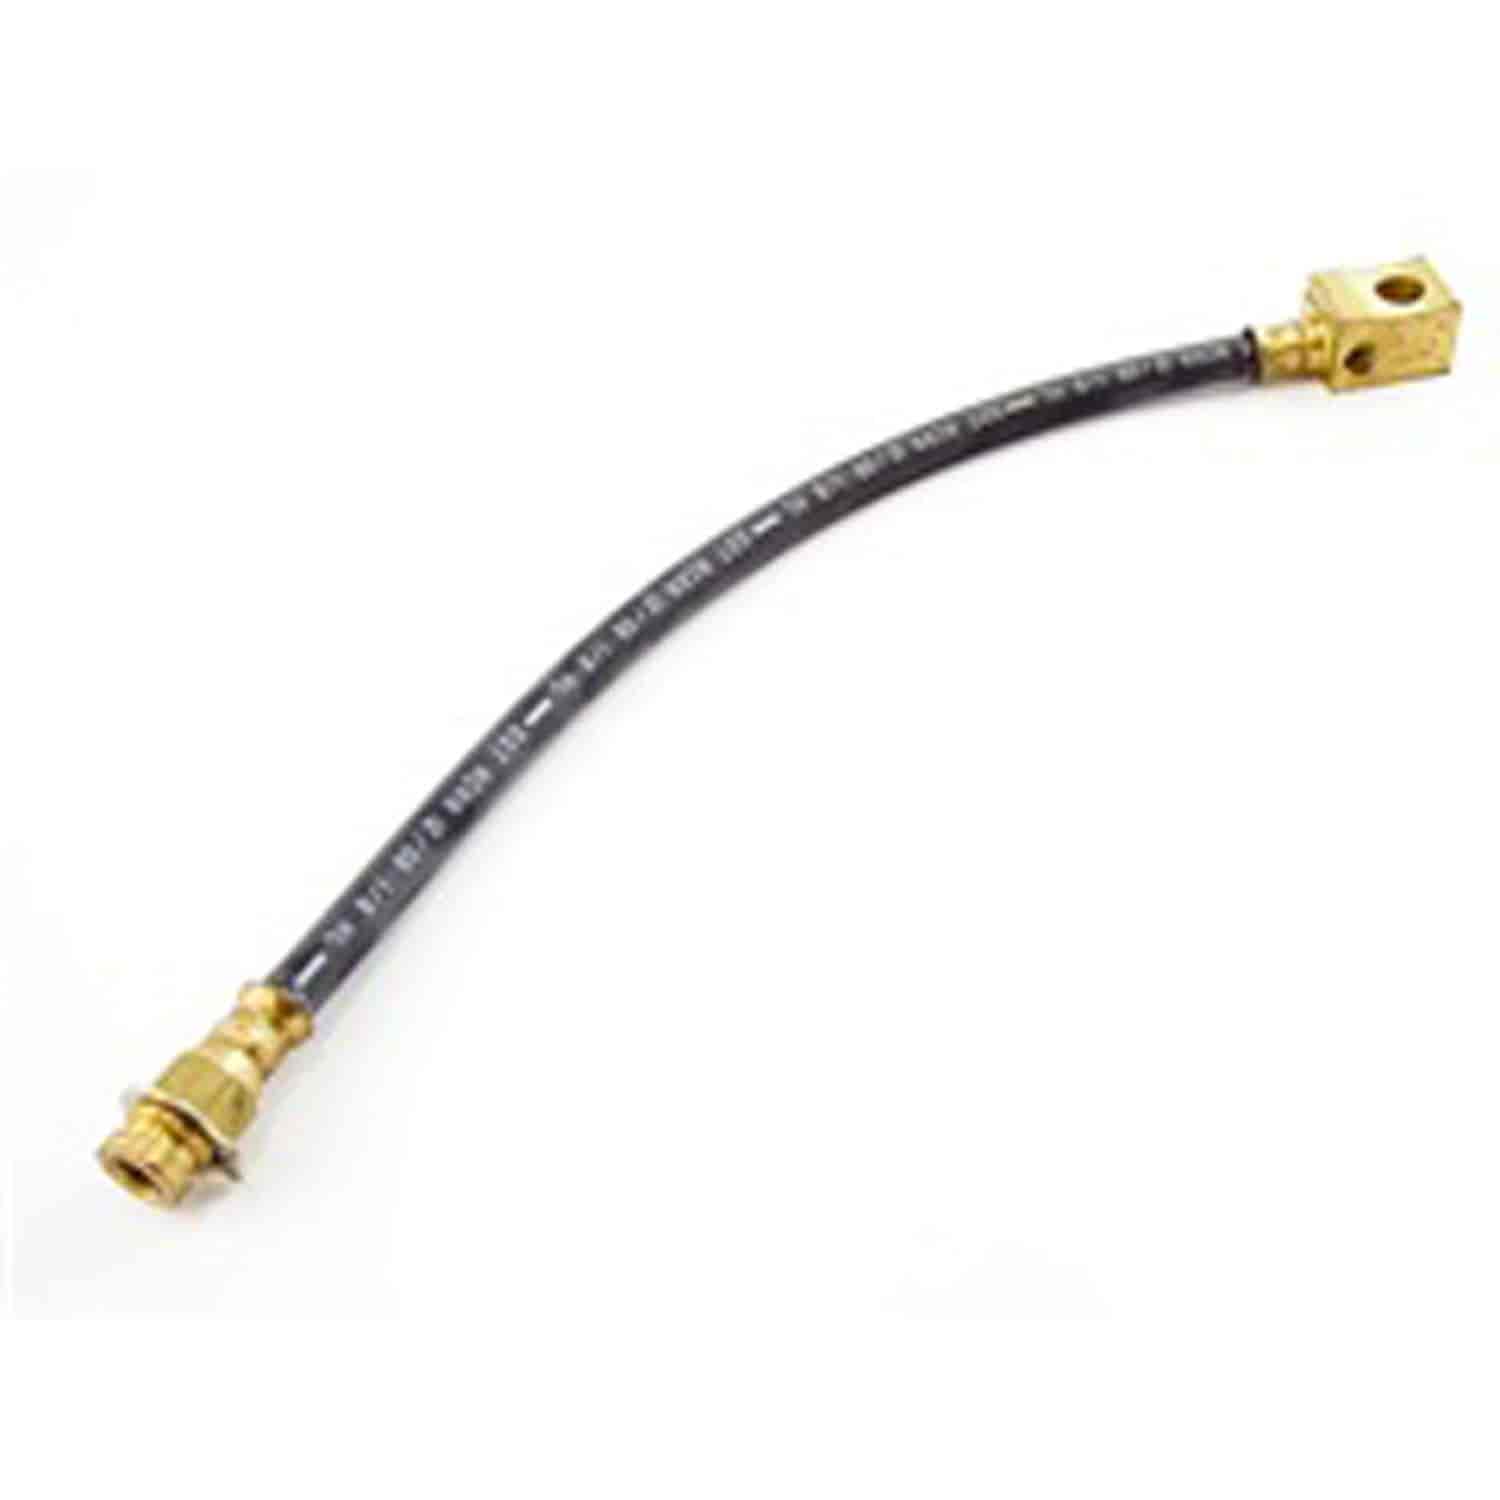 This rear center brake hose from Omix-ADA fits 1990-1991 Jeep Cherokees. One required per vehicle.